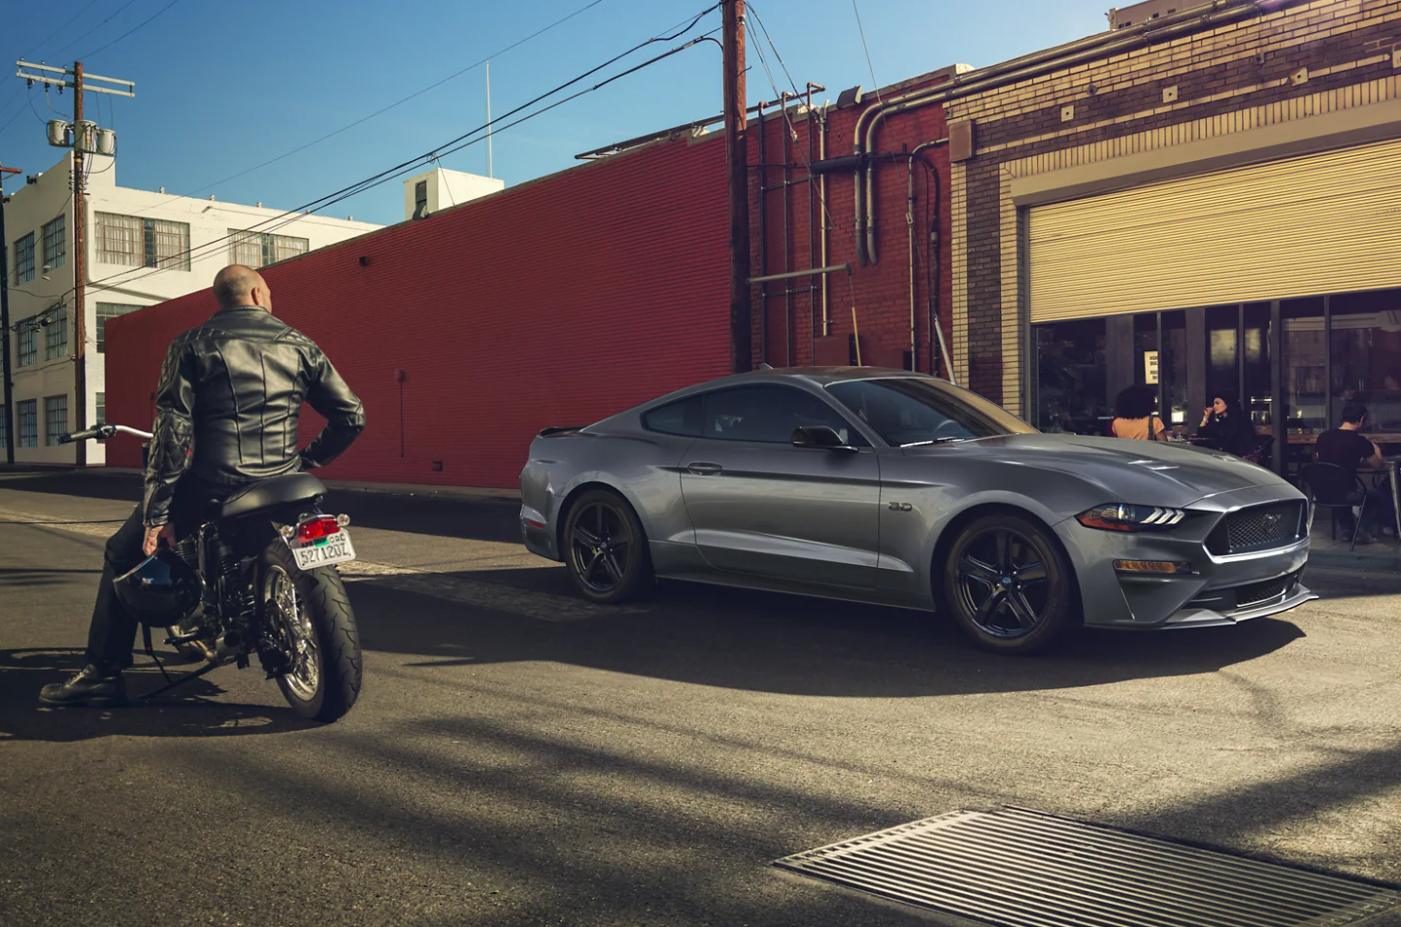 A gray 2023 Ford Mustang is parked on a city street next to a brick building